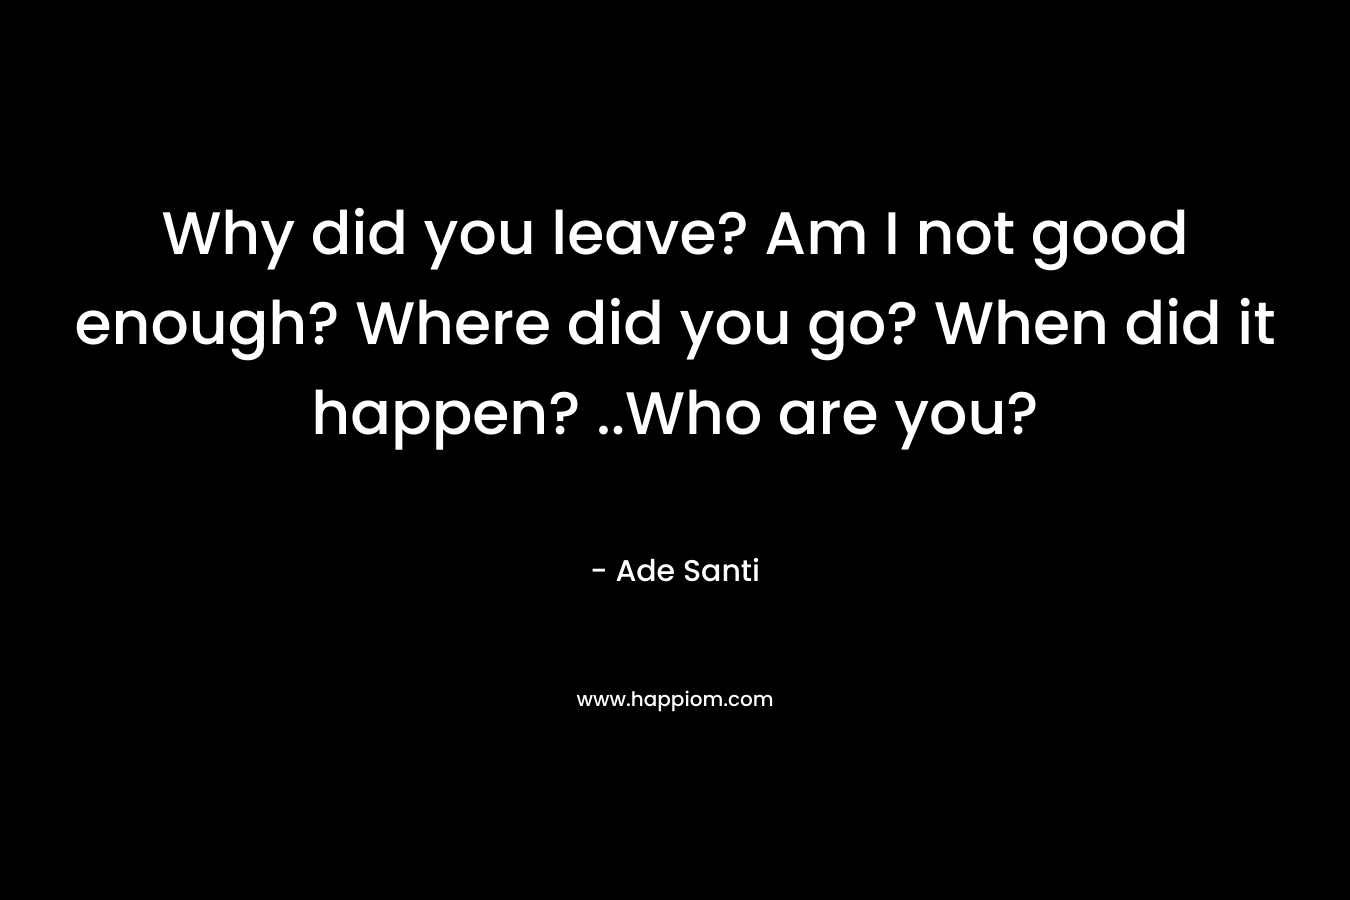 Why did you leave? Am I not good enough? Where did you go? When did it happen? ..Who are you? – Ade Santi